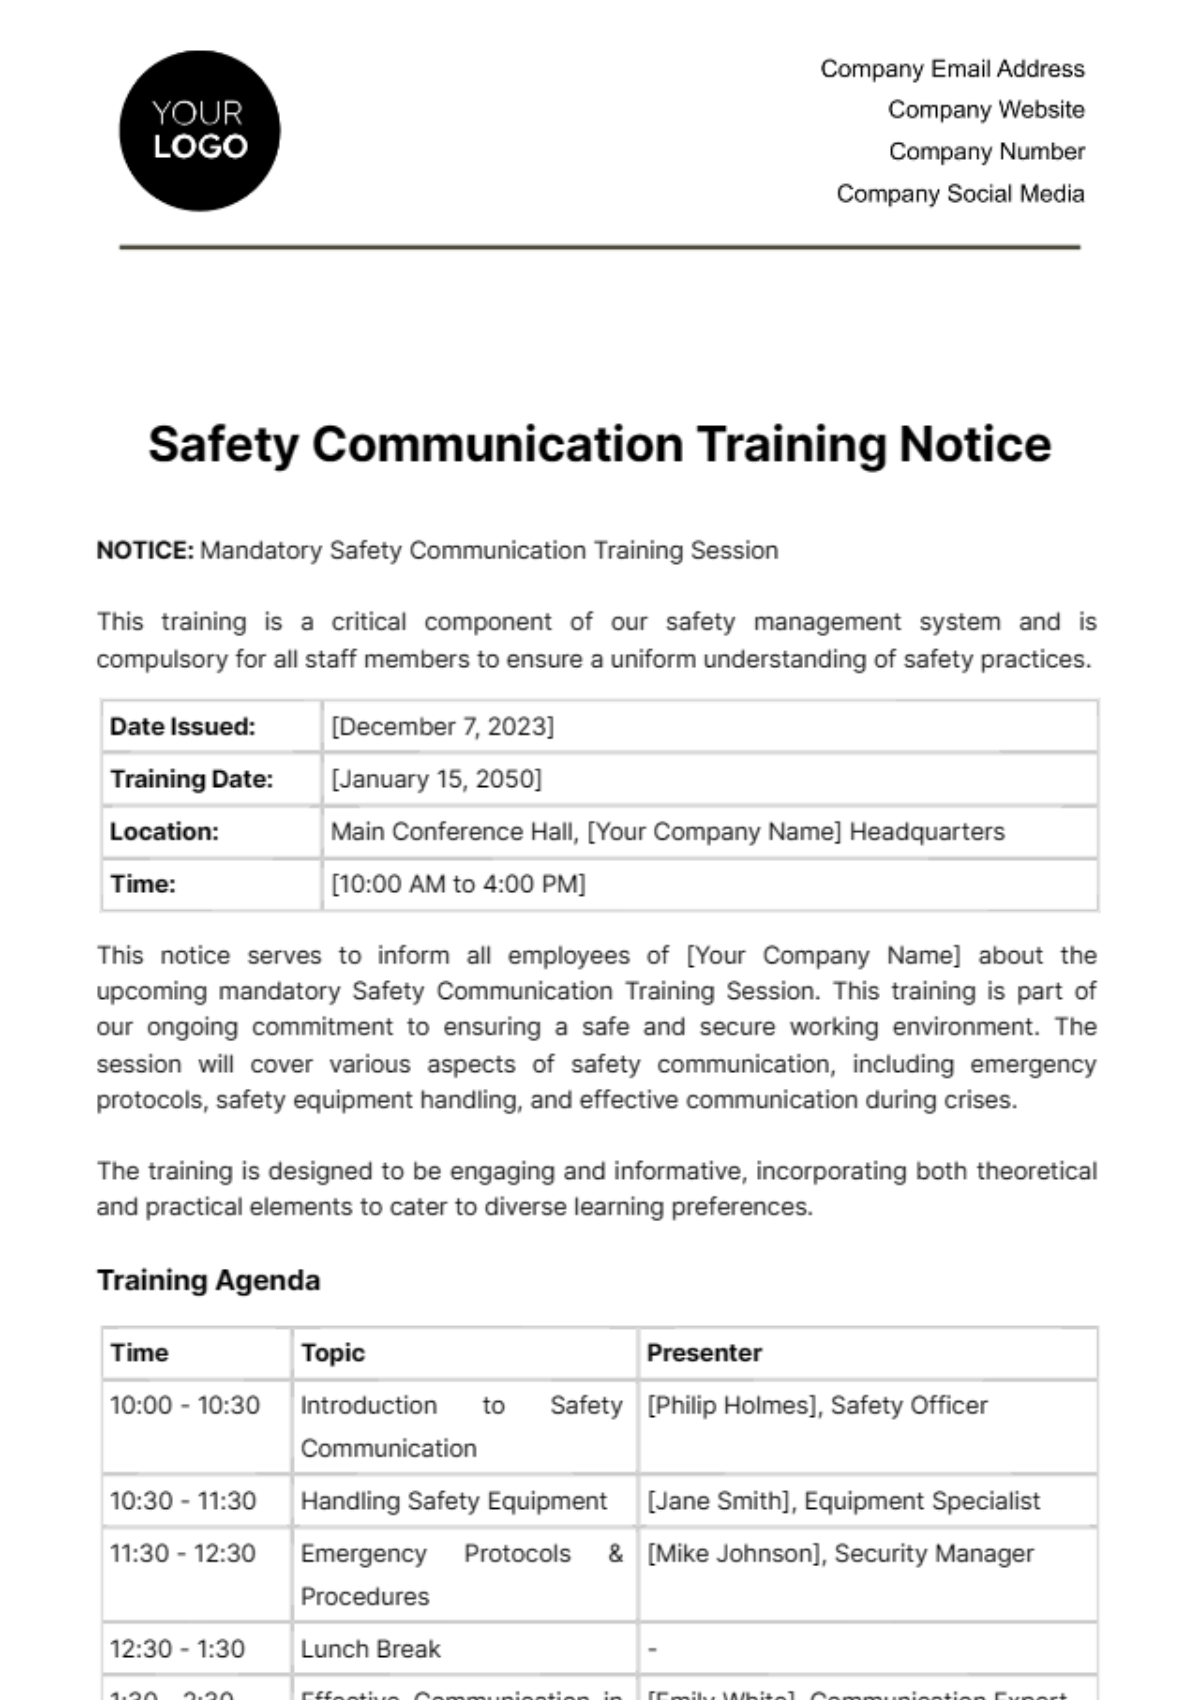 Safety Communication Training Notice Template